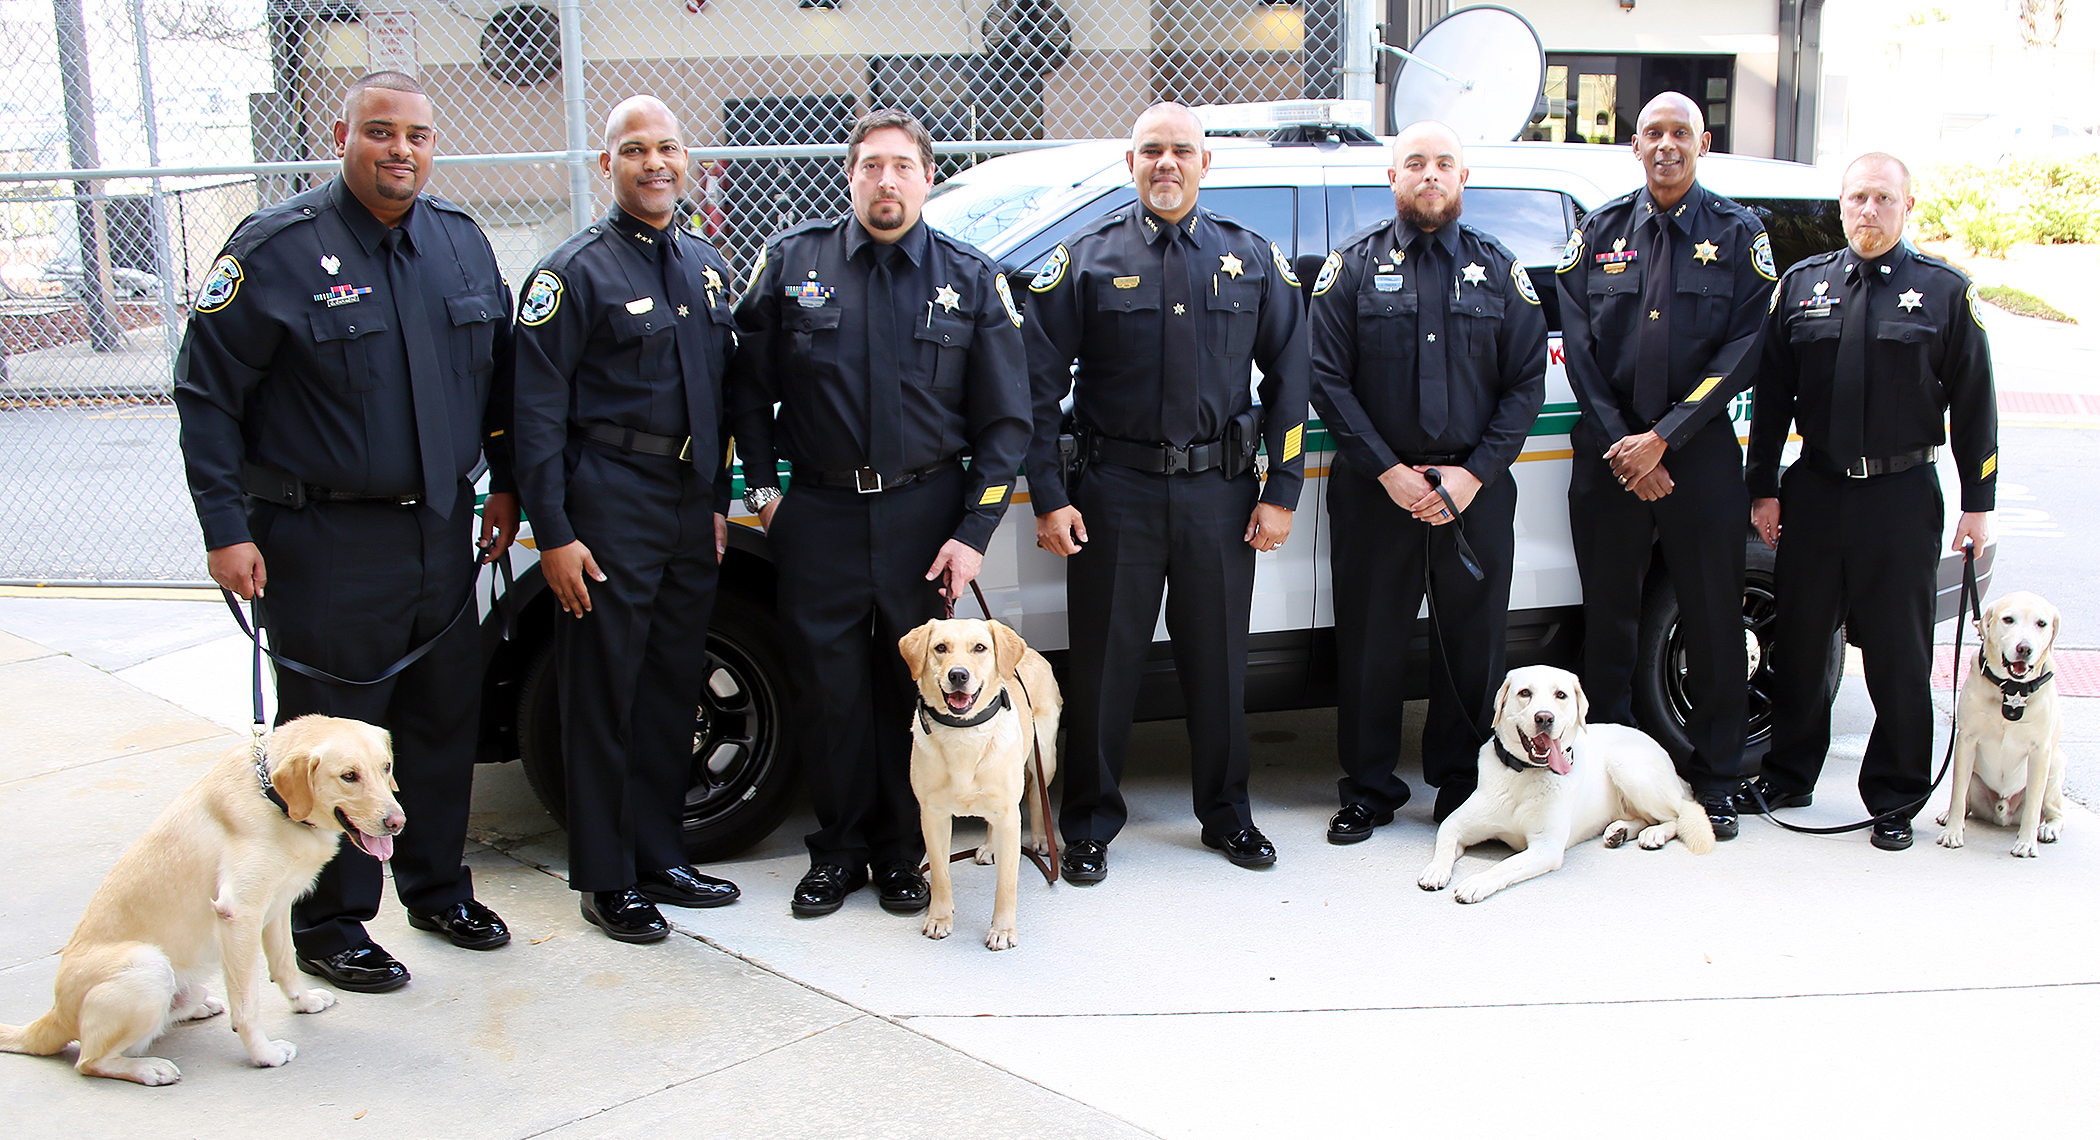 Image of K9s, DCs, and Chief